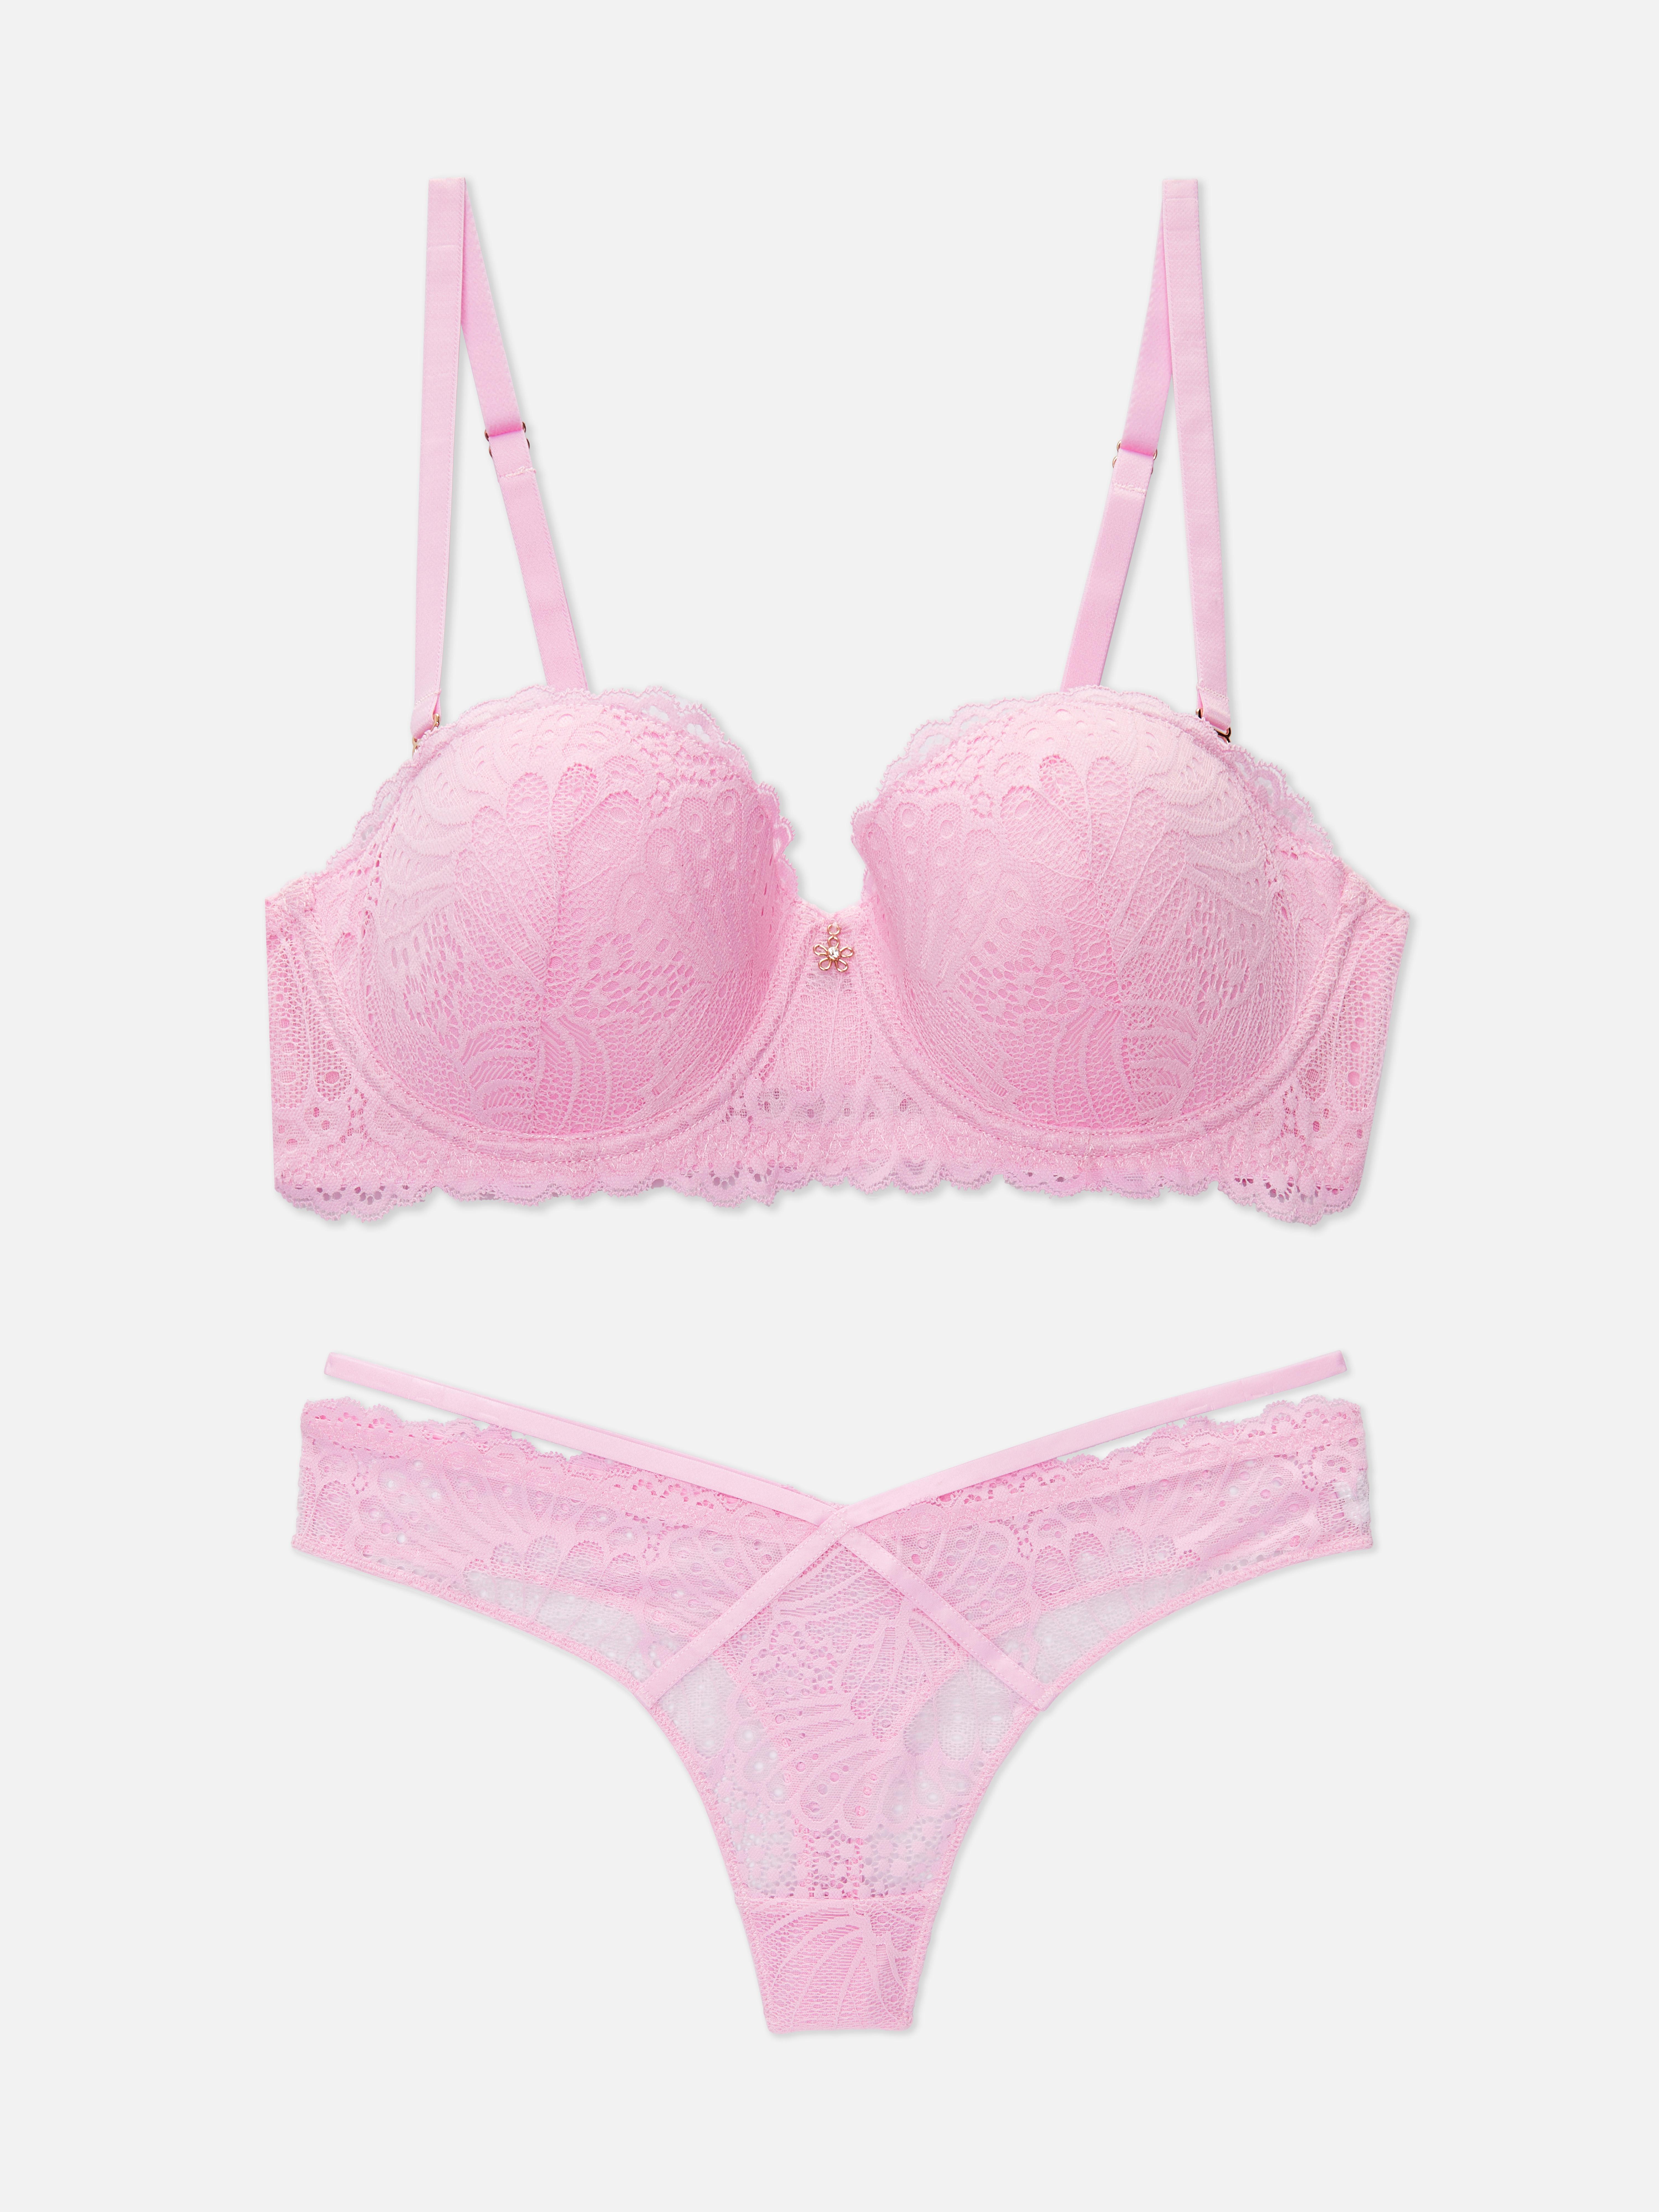 Primark lovers are raving over their seamless, wireless bra and thong sets  that only cost £6